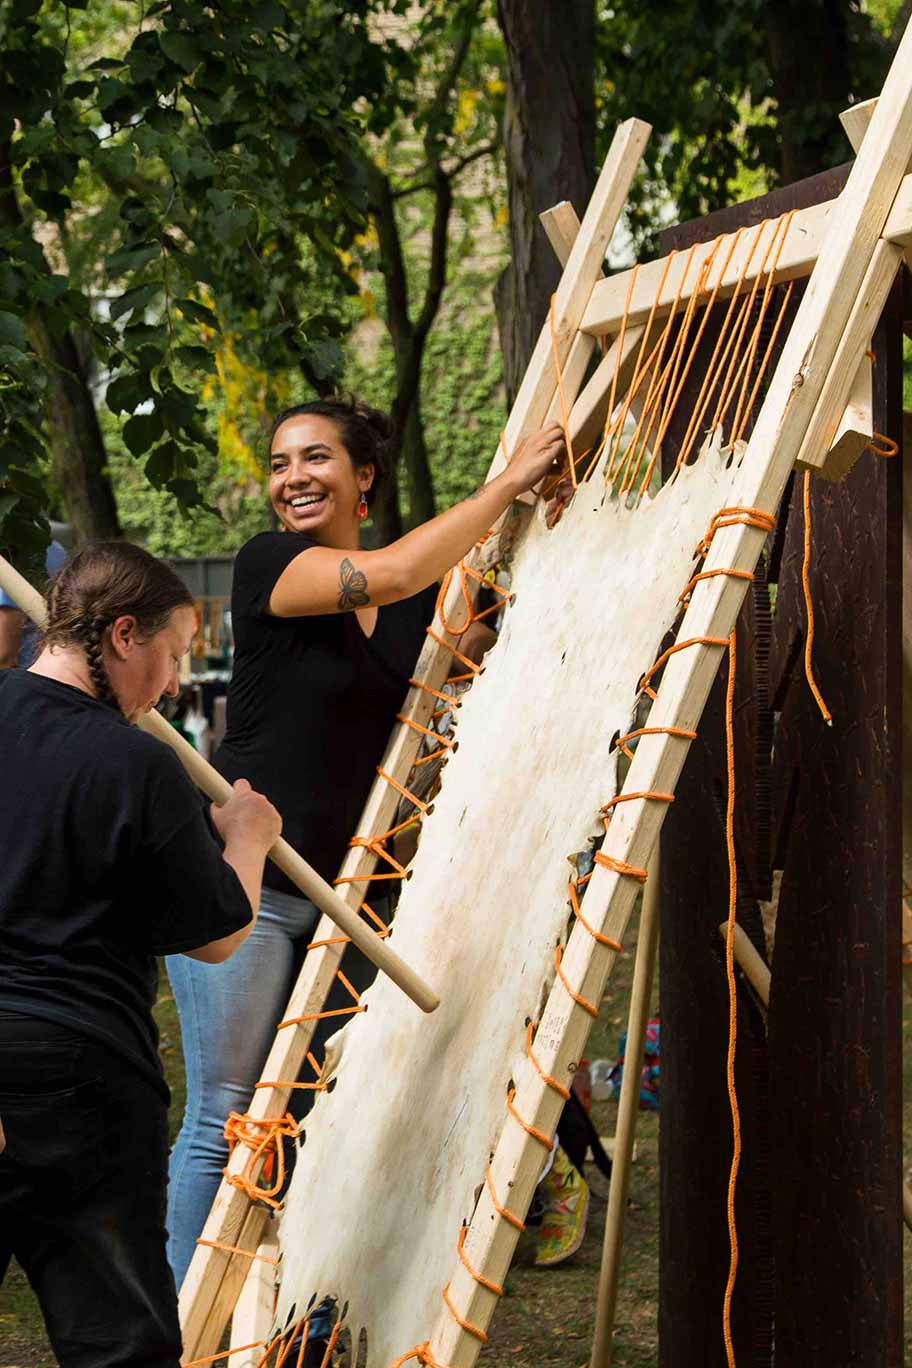 Pictured here is Amber Sandy of Scixchange, in front of the Hide Tanning at the 2019 Ryerson Pow Wow - in the Ryerson quad. The Hide is stretched over a frame, another person is working on the Hide with a large stick.